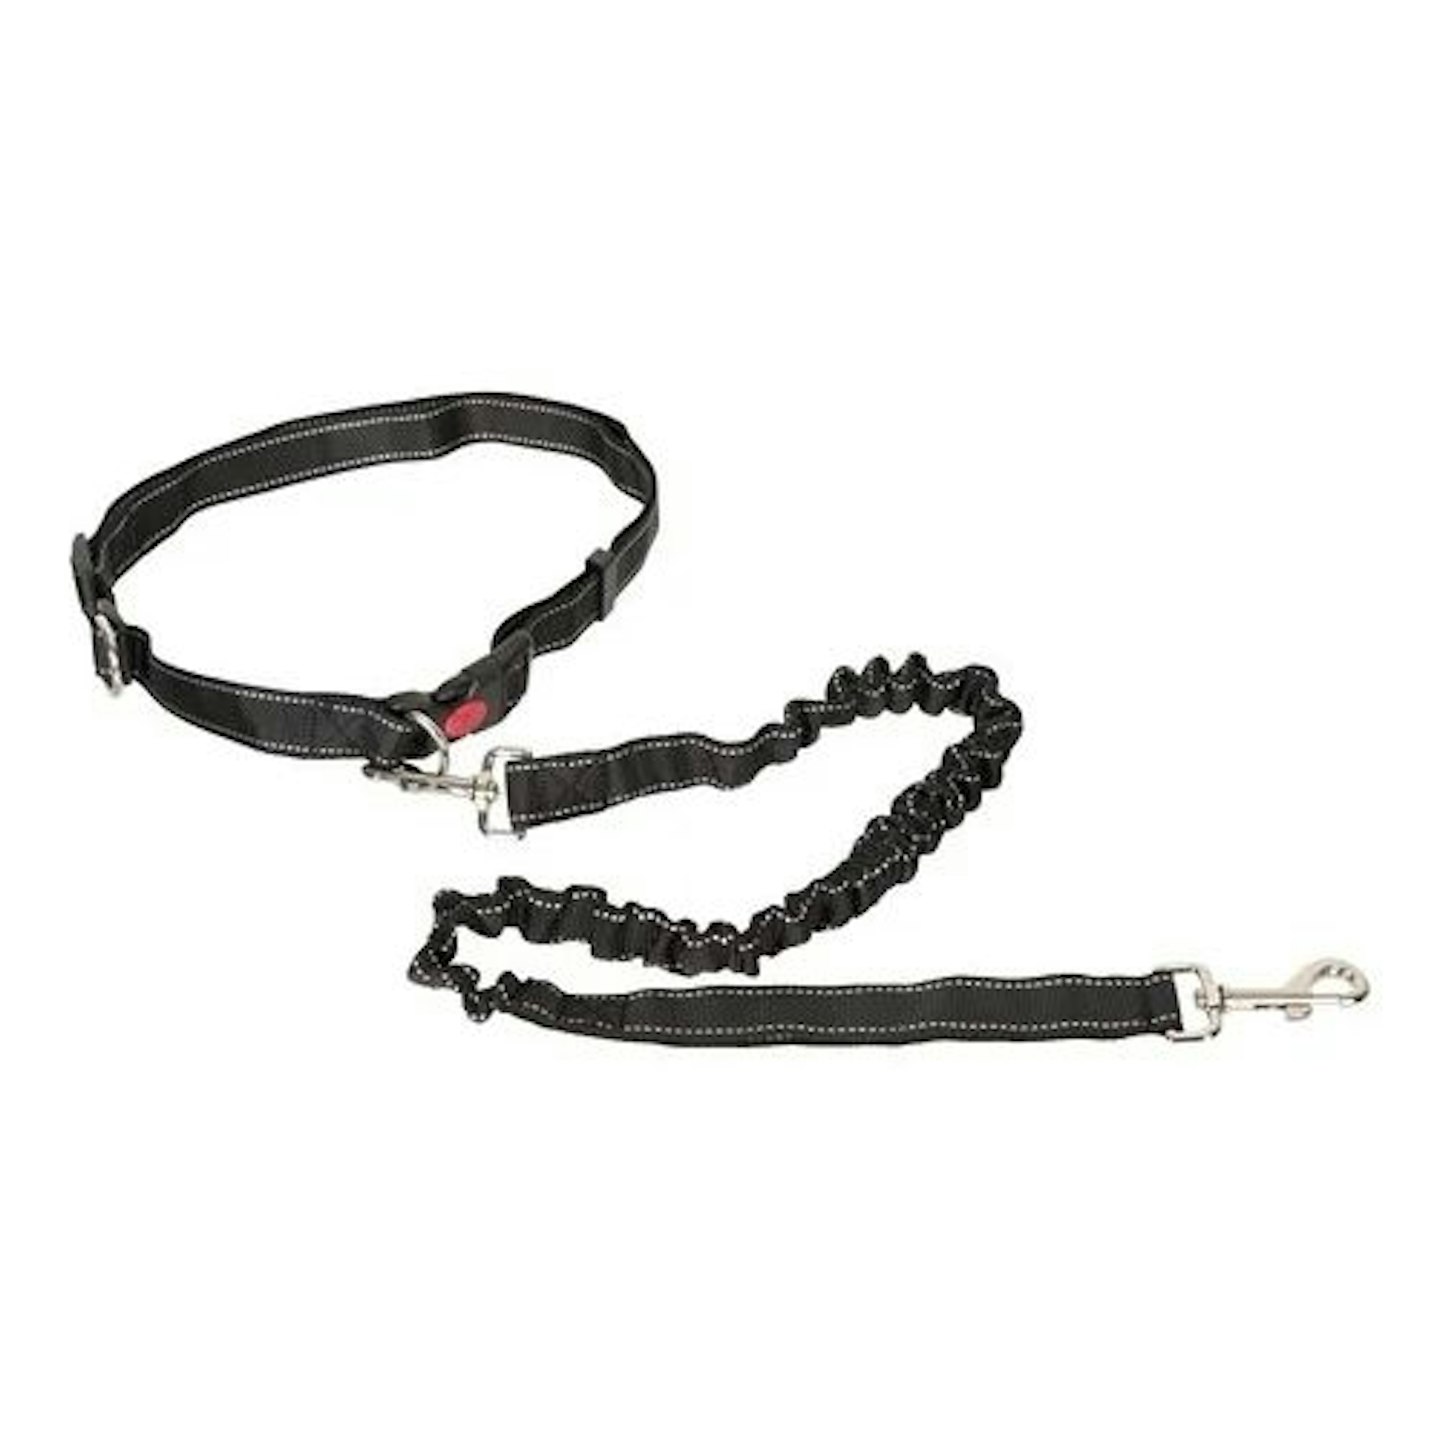 Running Belt With Dog Lead